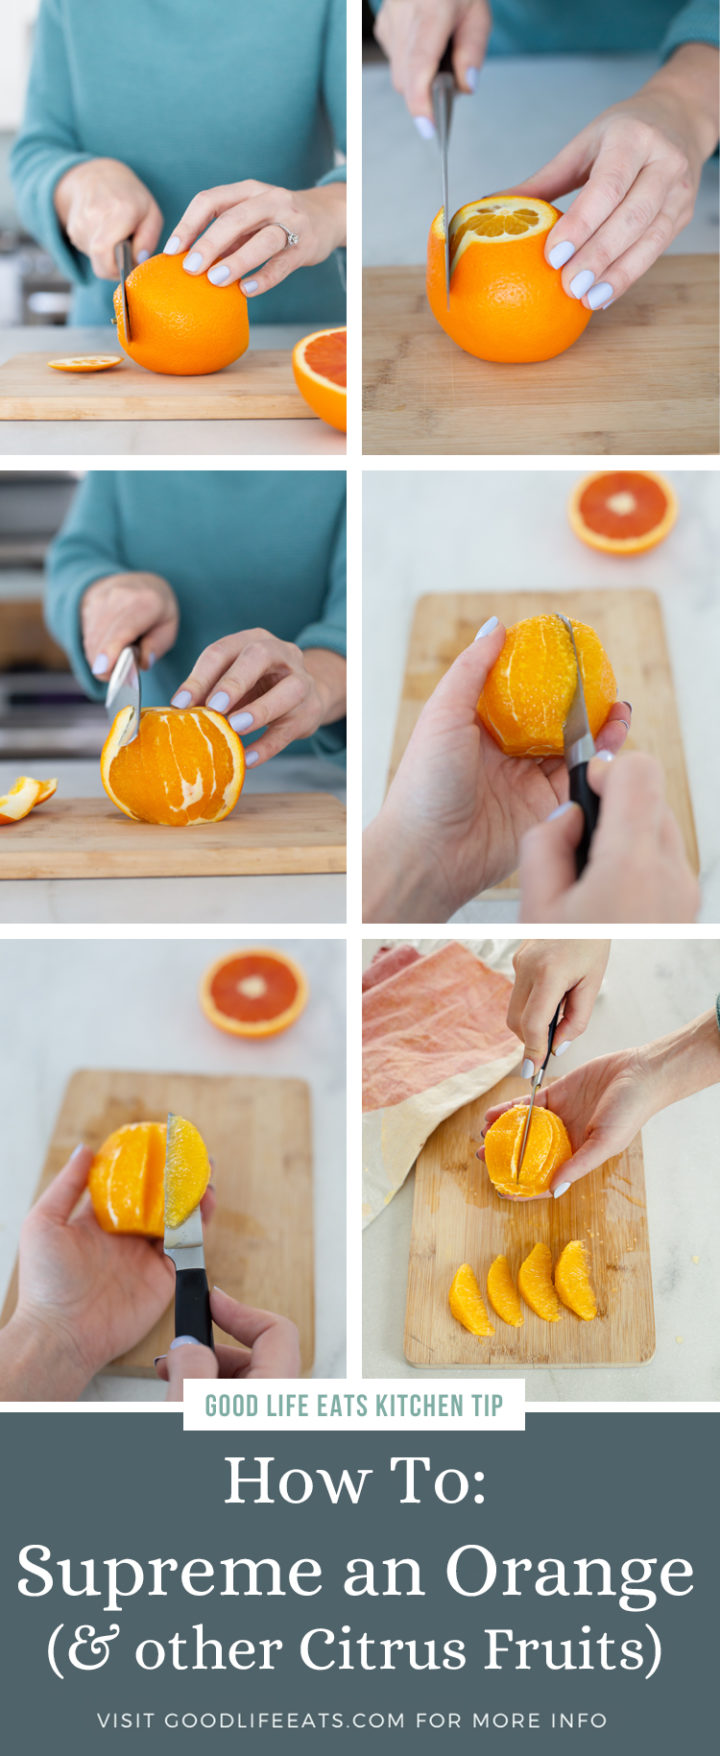 step by step images to segment an orange (how to supreme an orange)